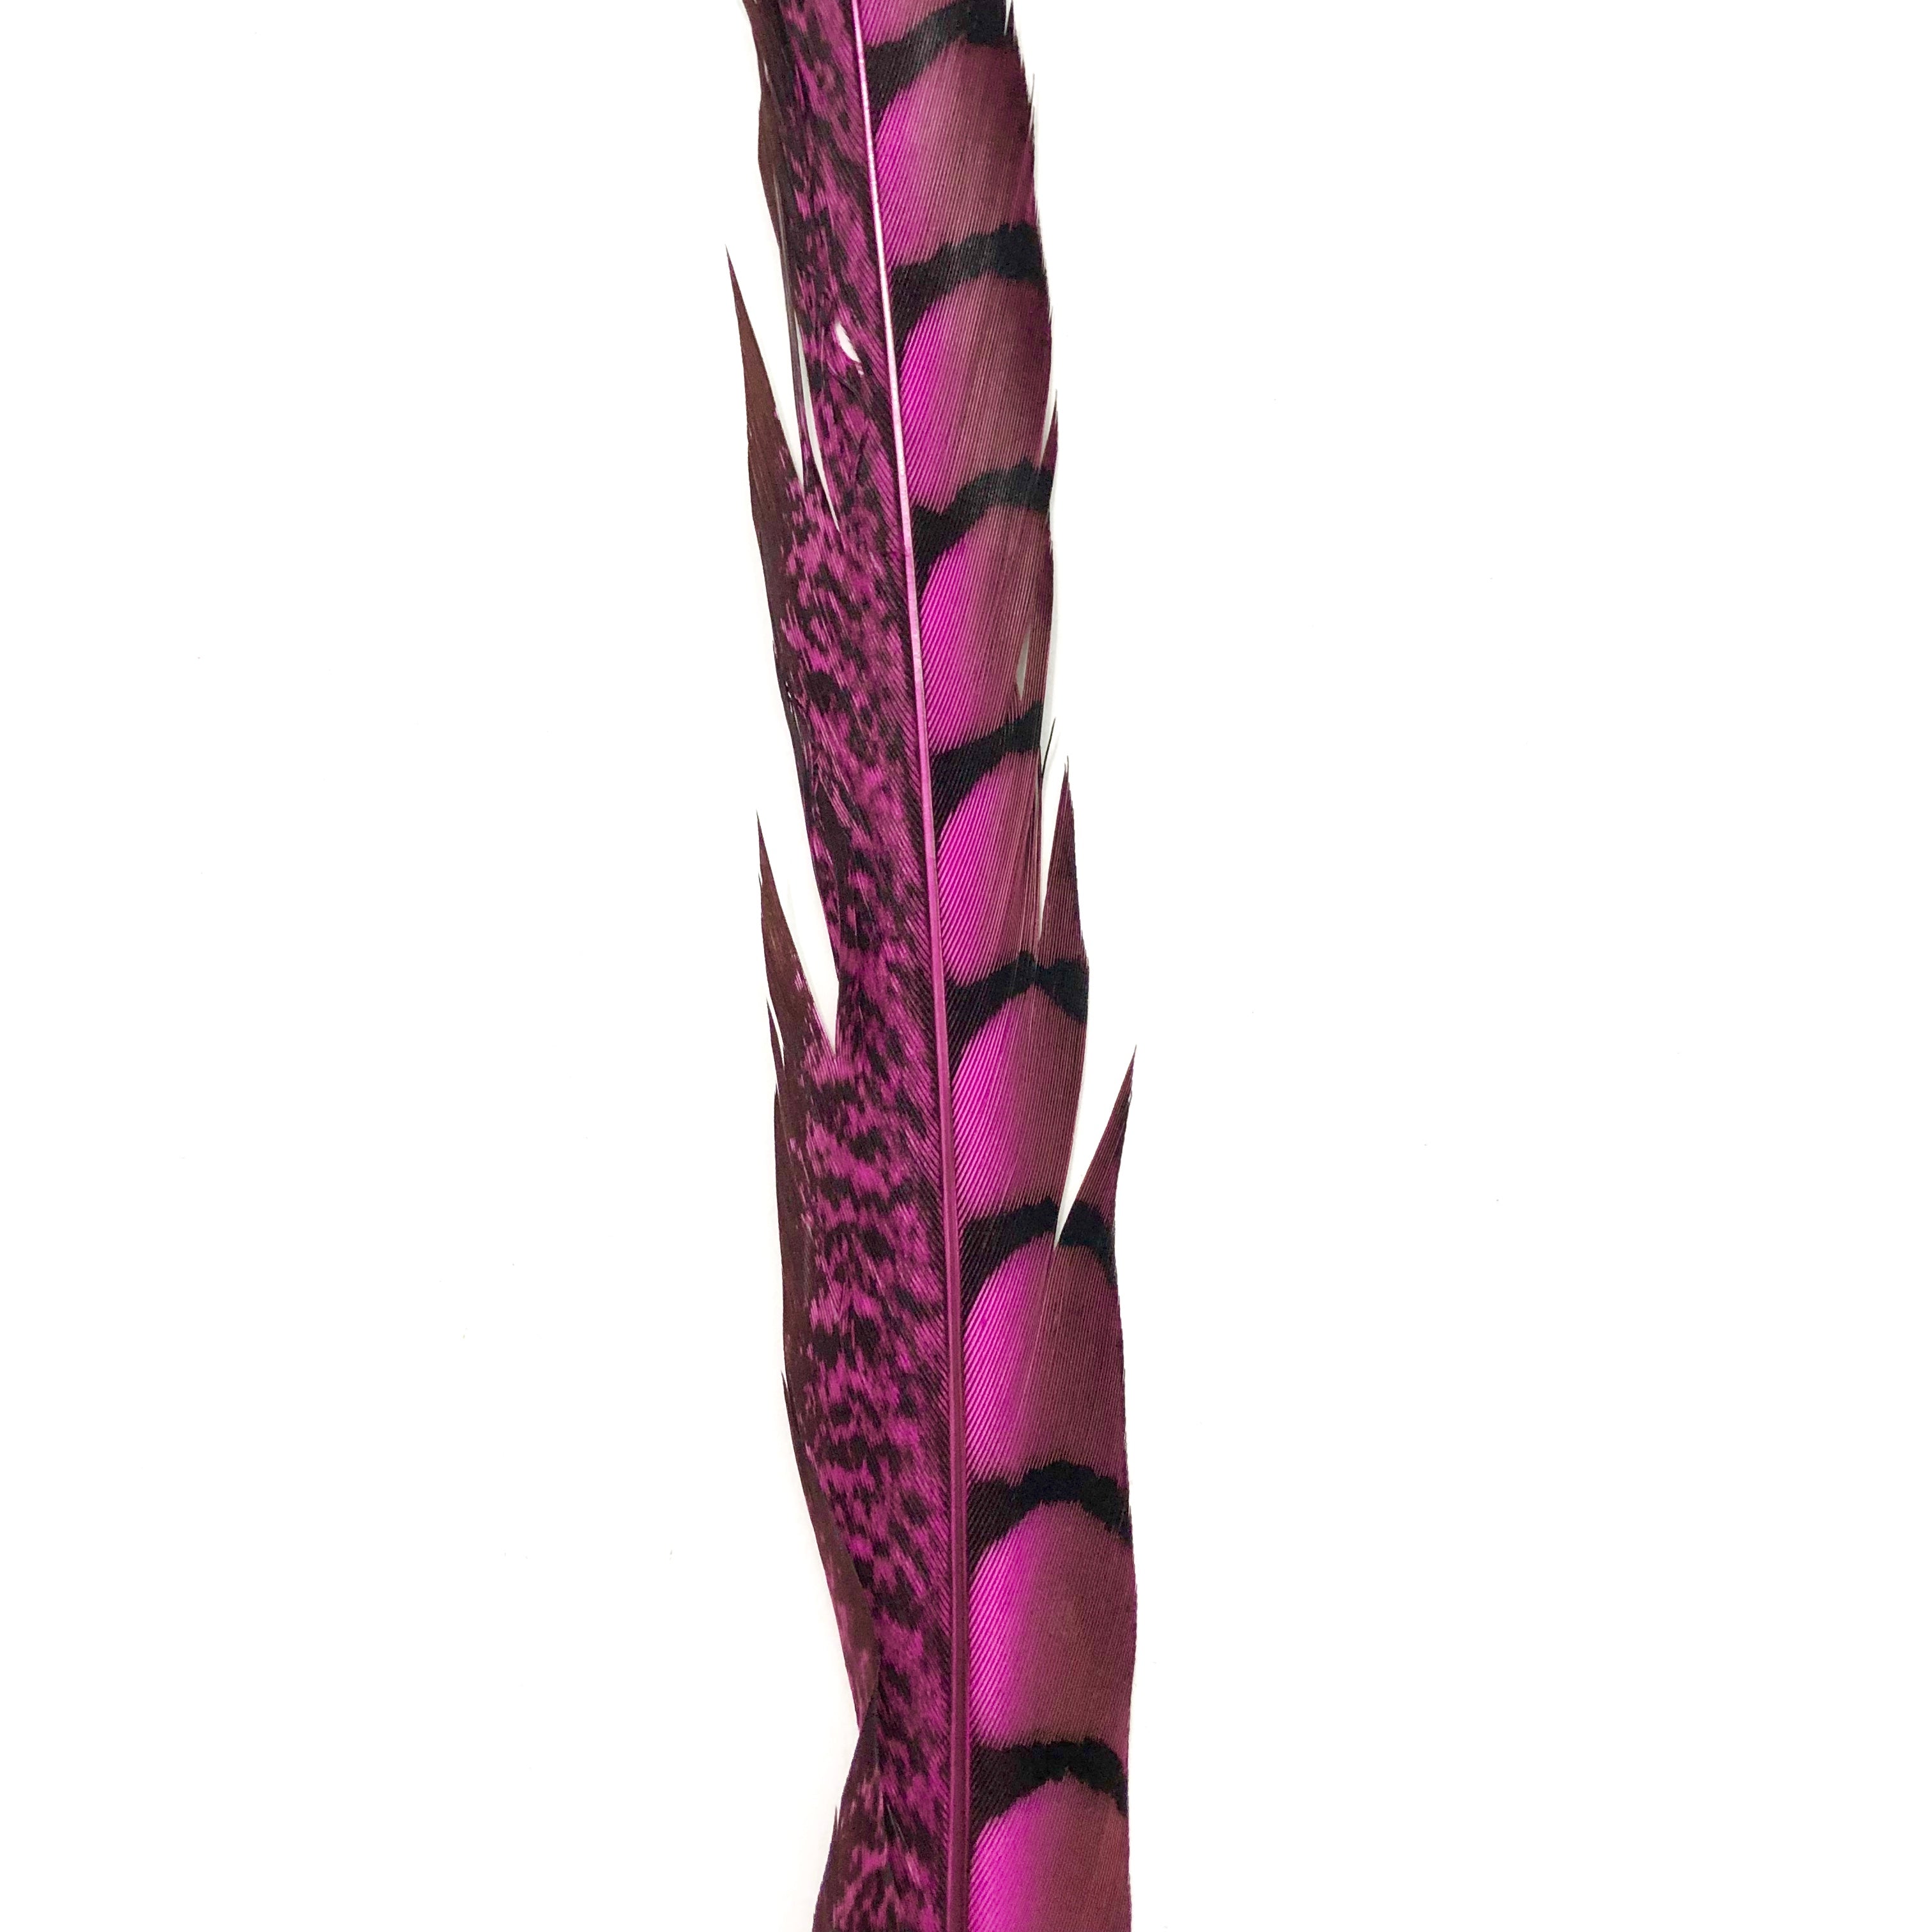 10" to 20" Lady Amherst Pheasant Side Tail Feather - Hot Pink